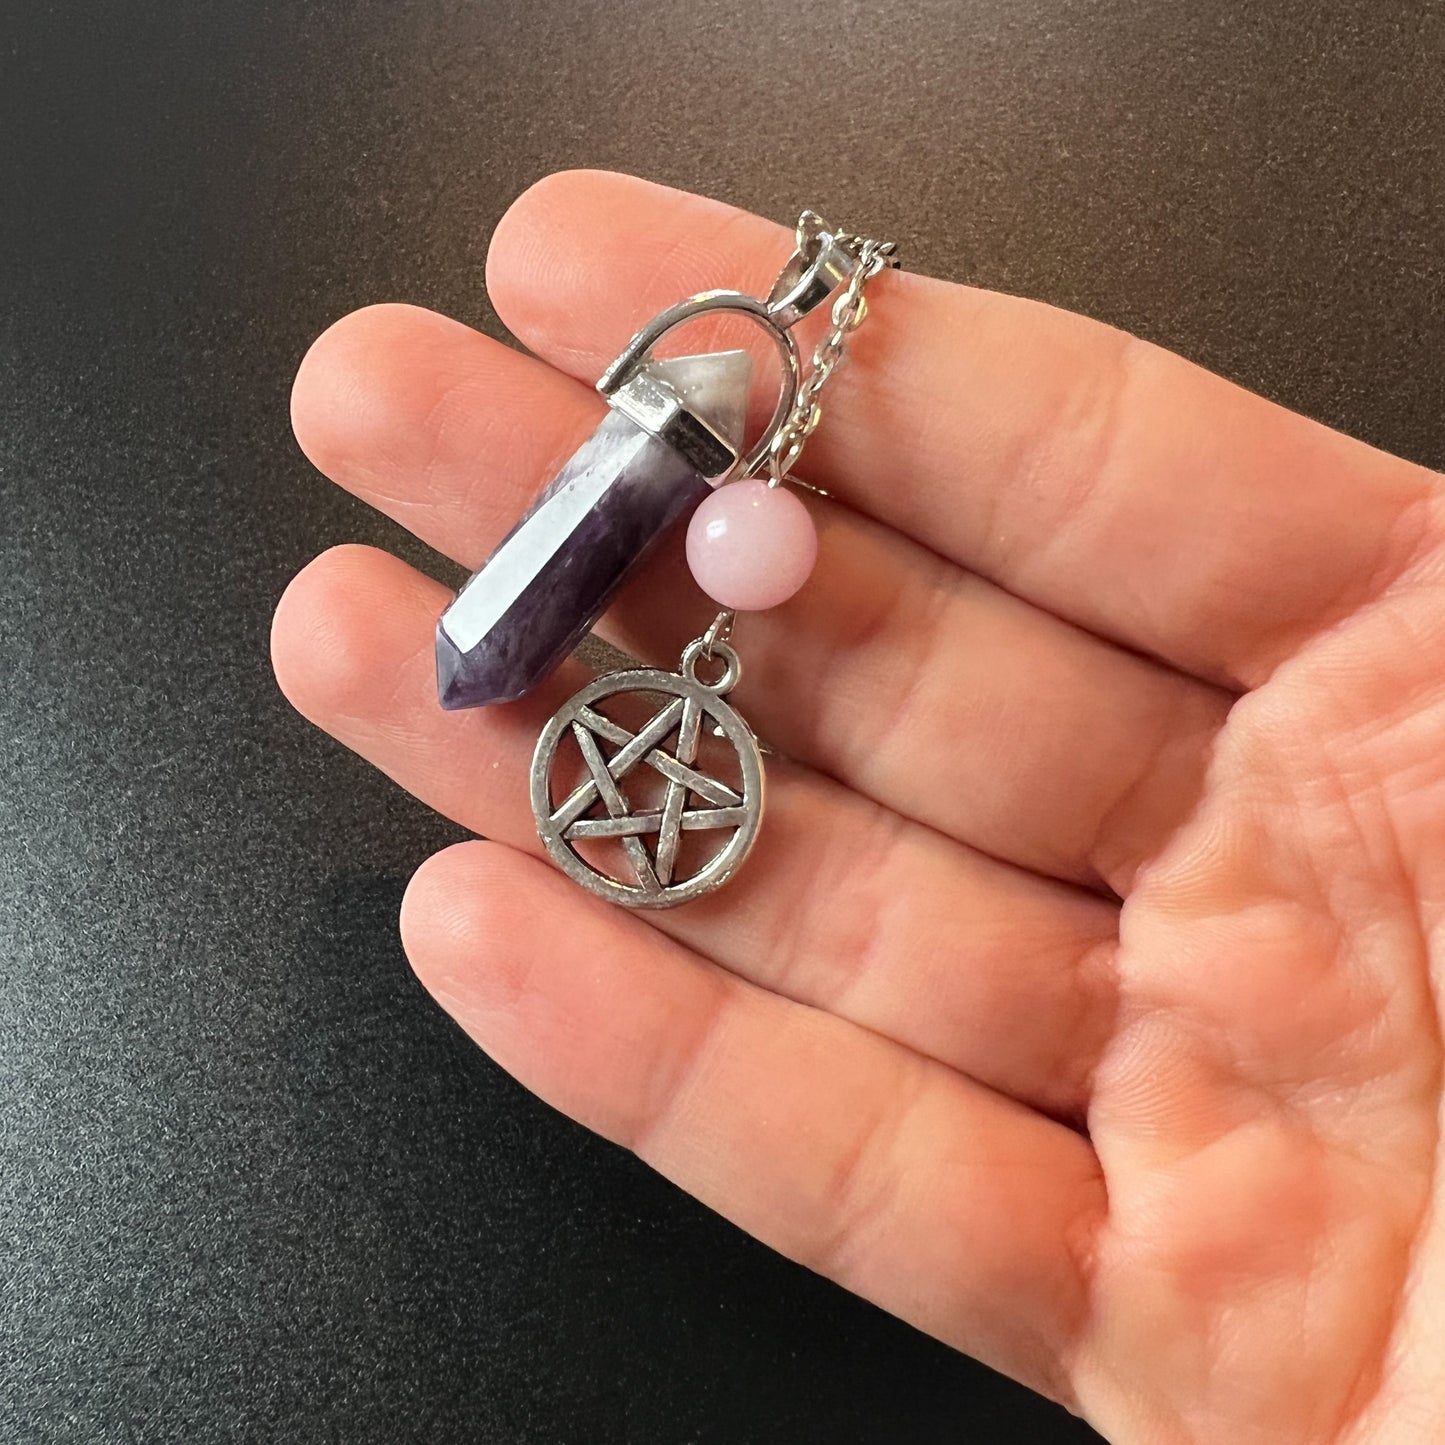 Amethyst, rose quartz and pentacle dowsing divination pendulum - The French Witch shop